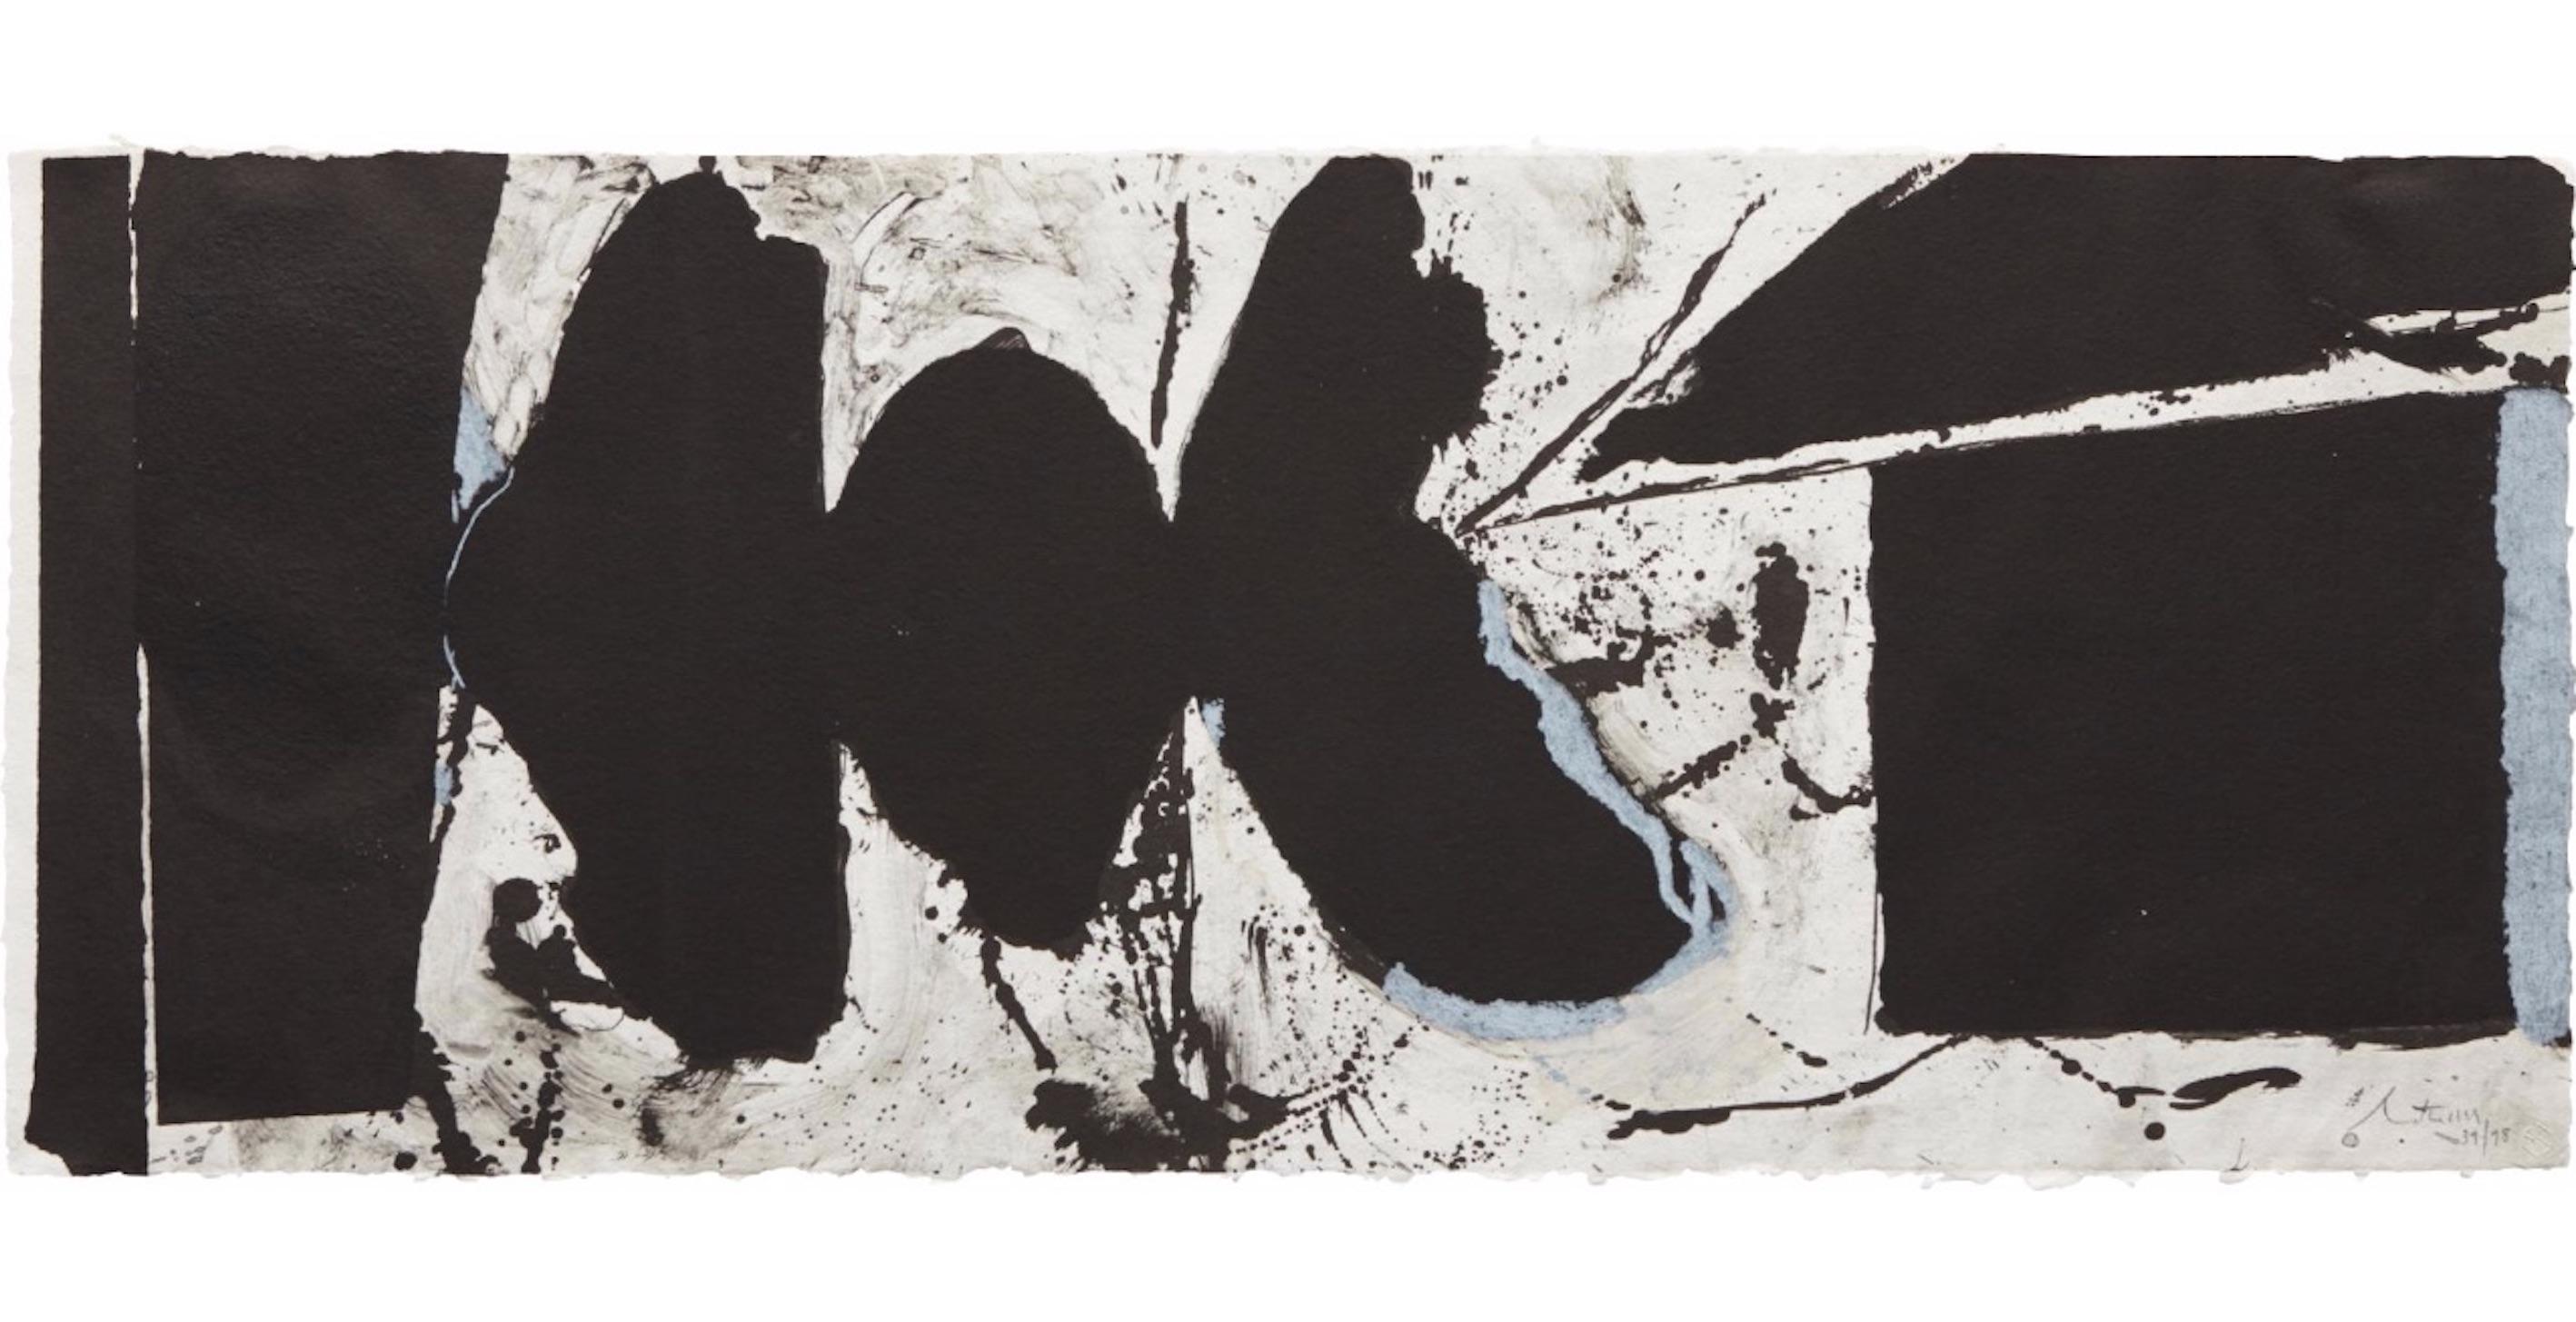 Elegy Black Black, a beautiful lithography from Motherwell's elegy series